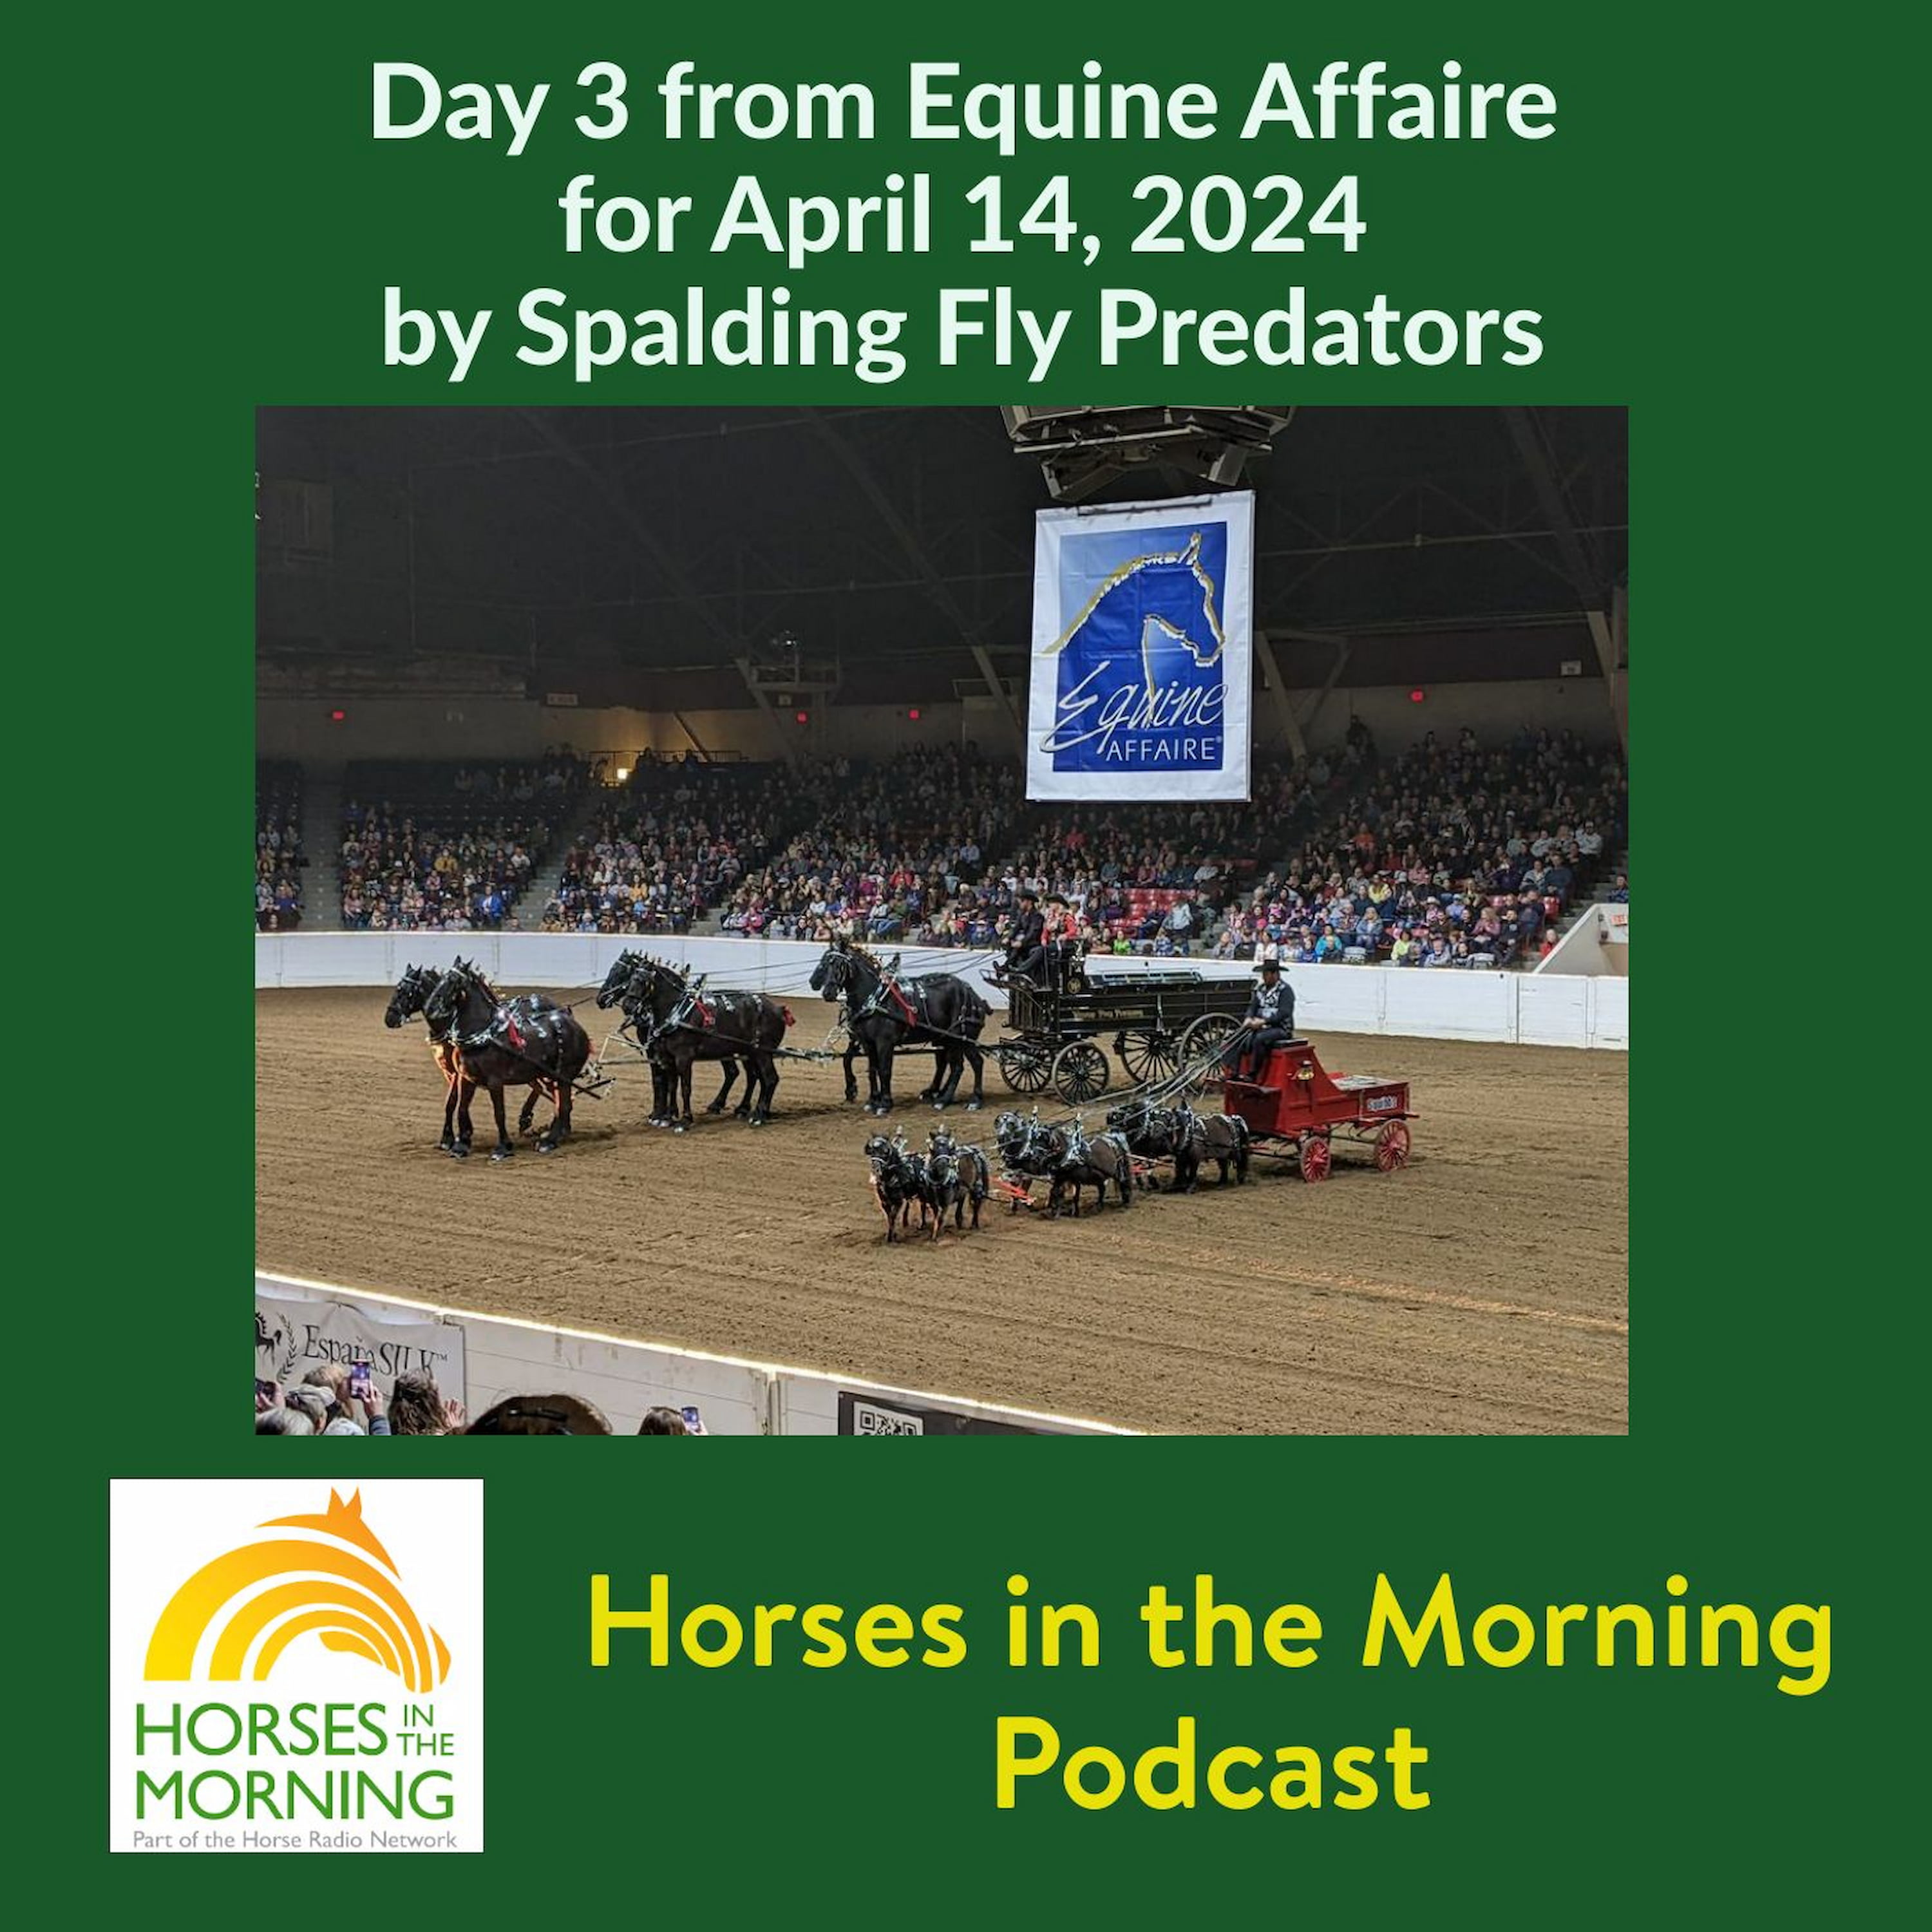 Day 3 from Equine Affaire for April 14, 2024 by Spalding Fly Predators